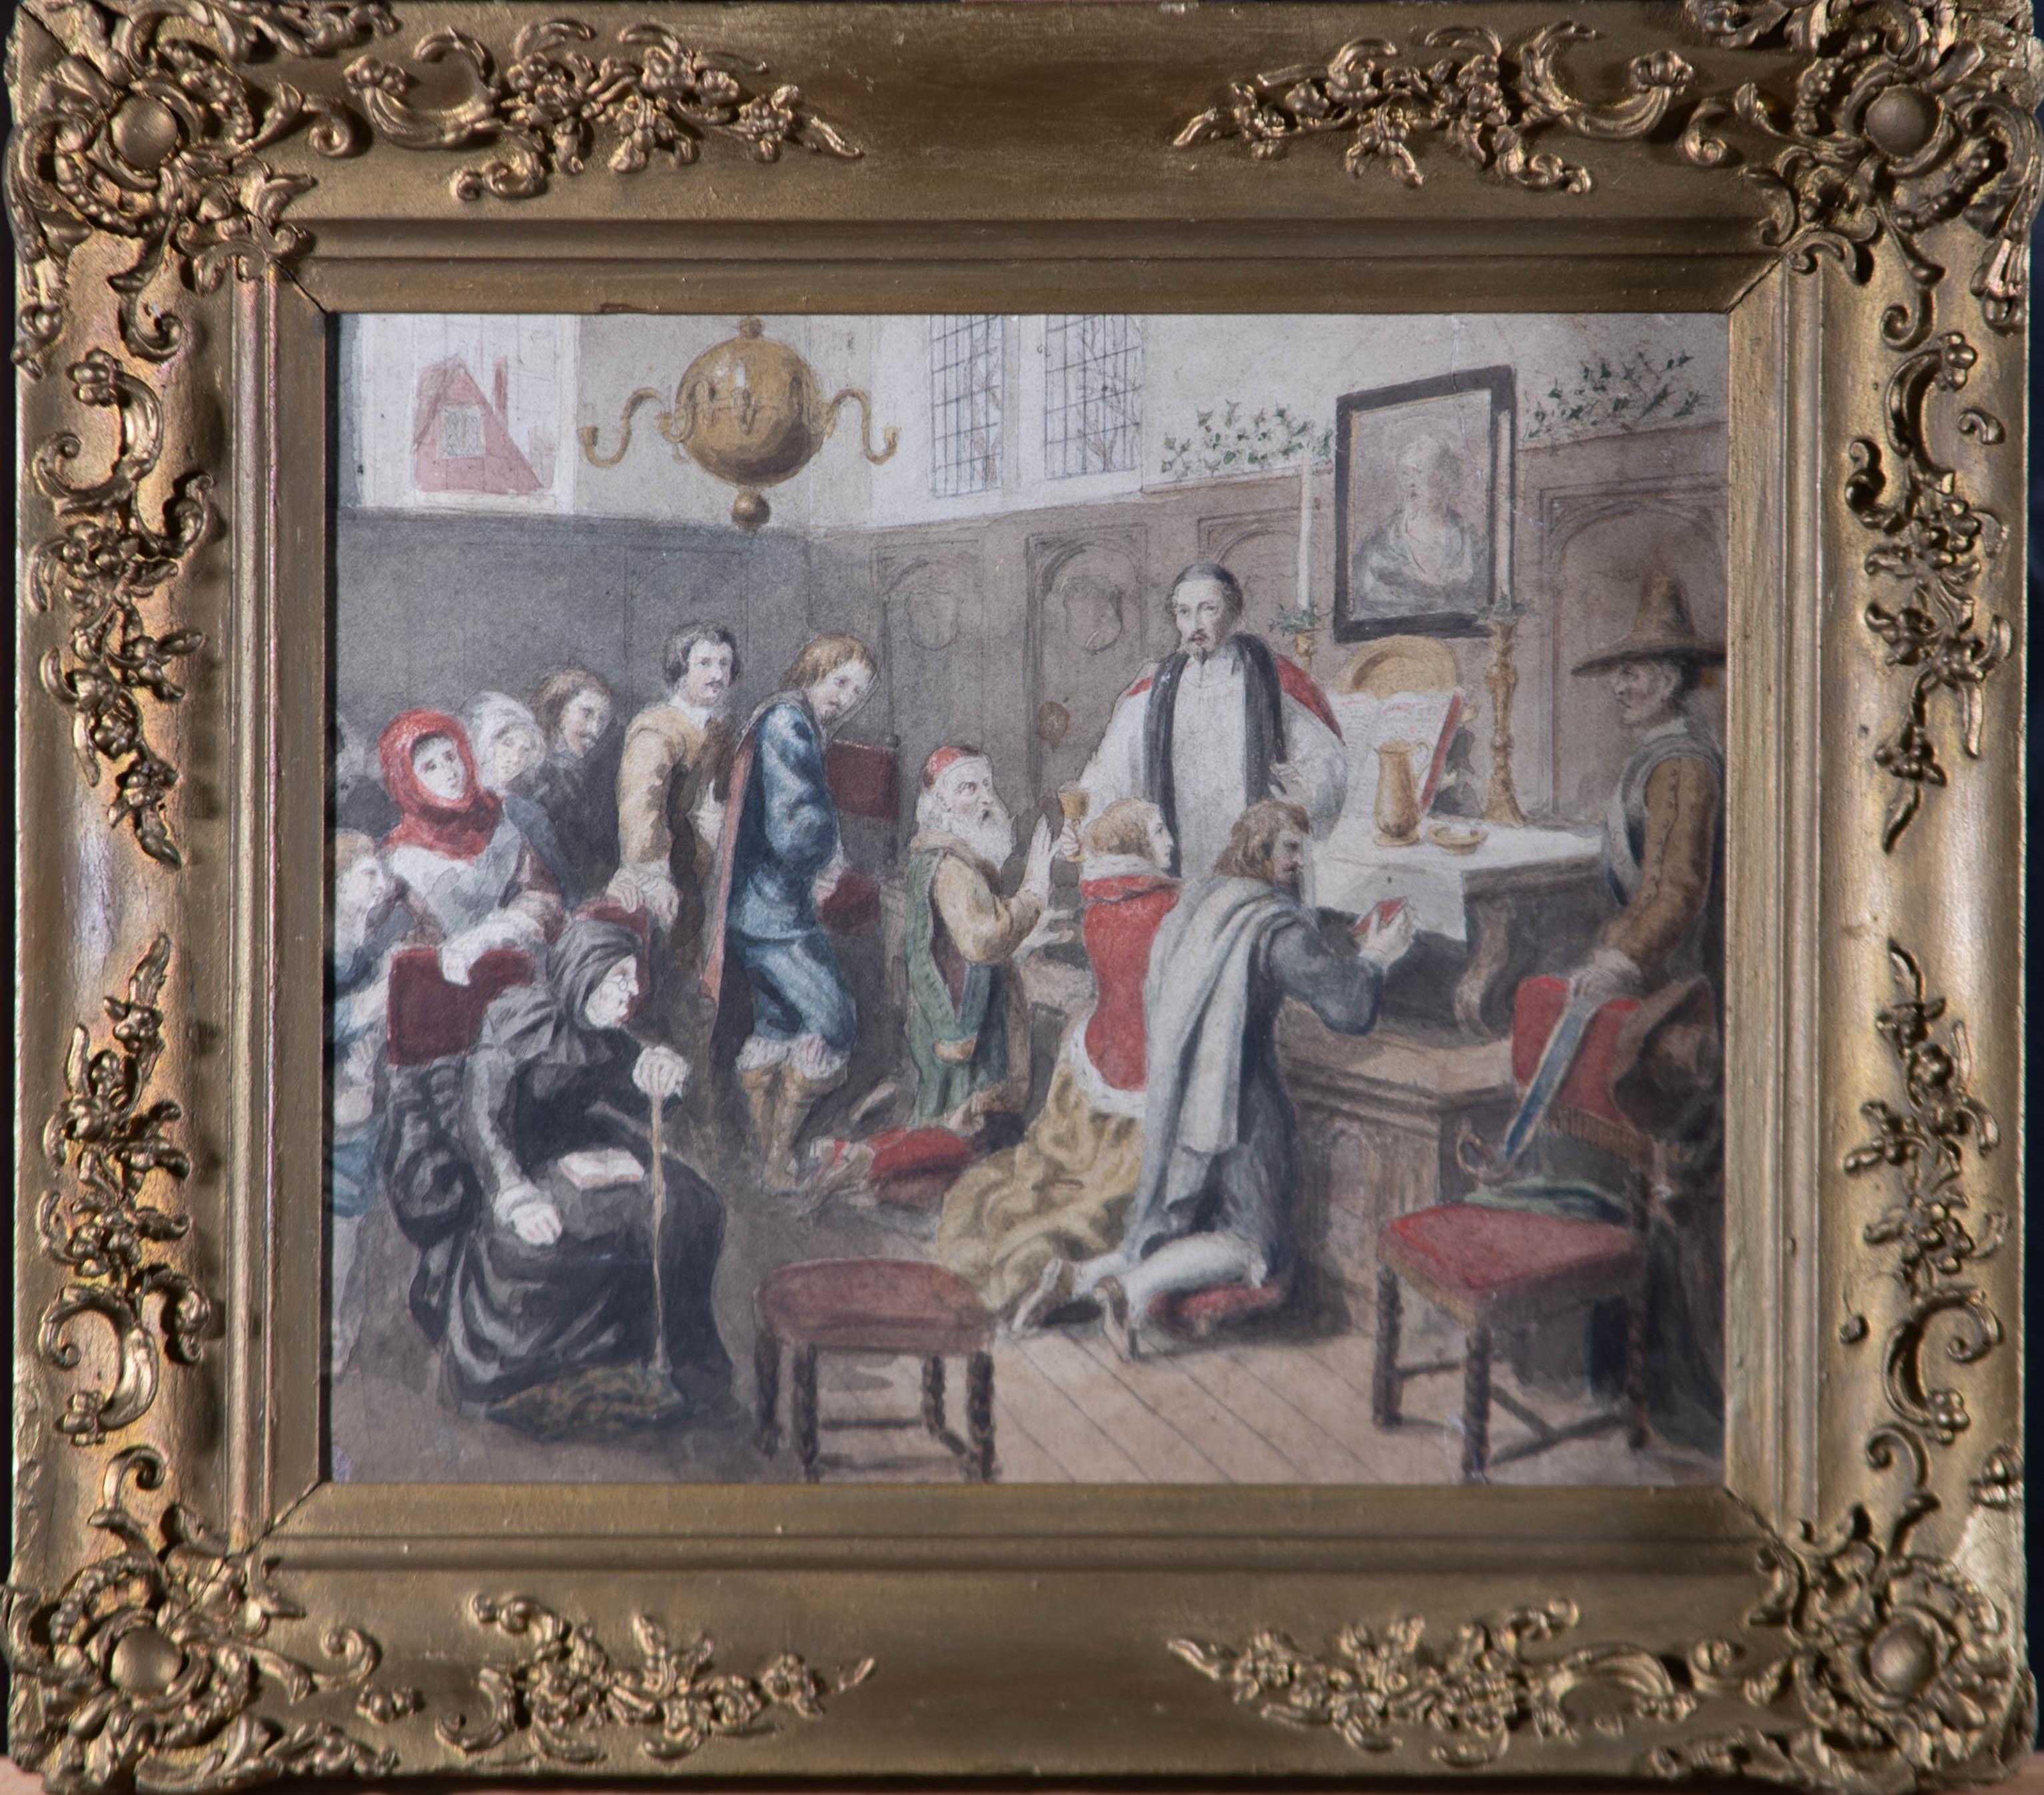 A very fine watercolour Jacobean interior scene showing an altar at which a crowd of people are partaking in a Eucharist. A priest blesses the wine and hands it to an elderly man who kneels before him. A young couple also kneel at the altar whilst a